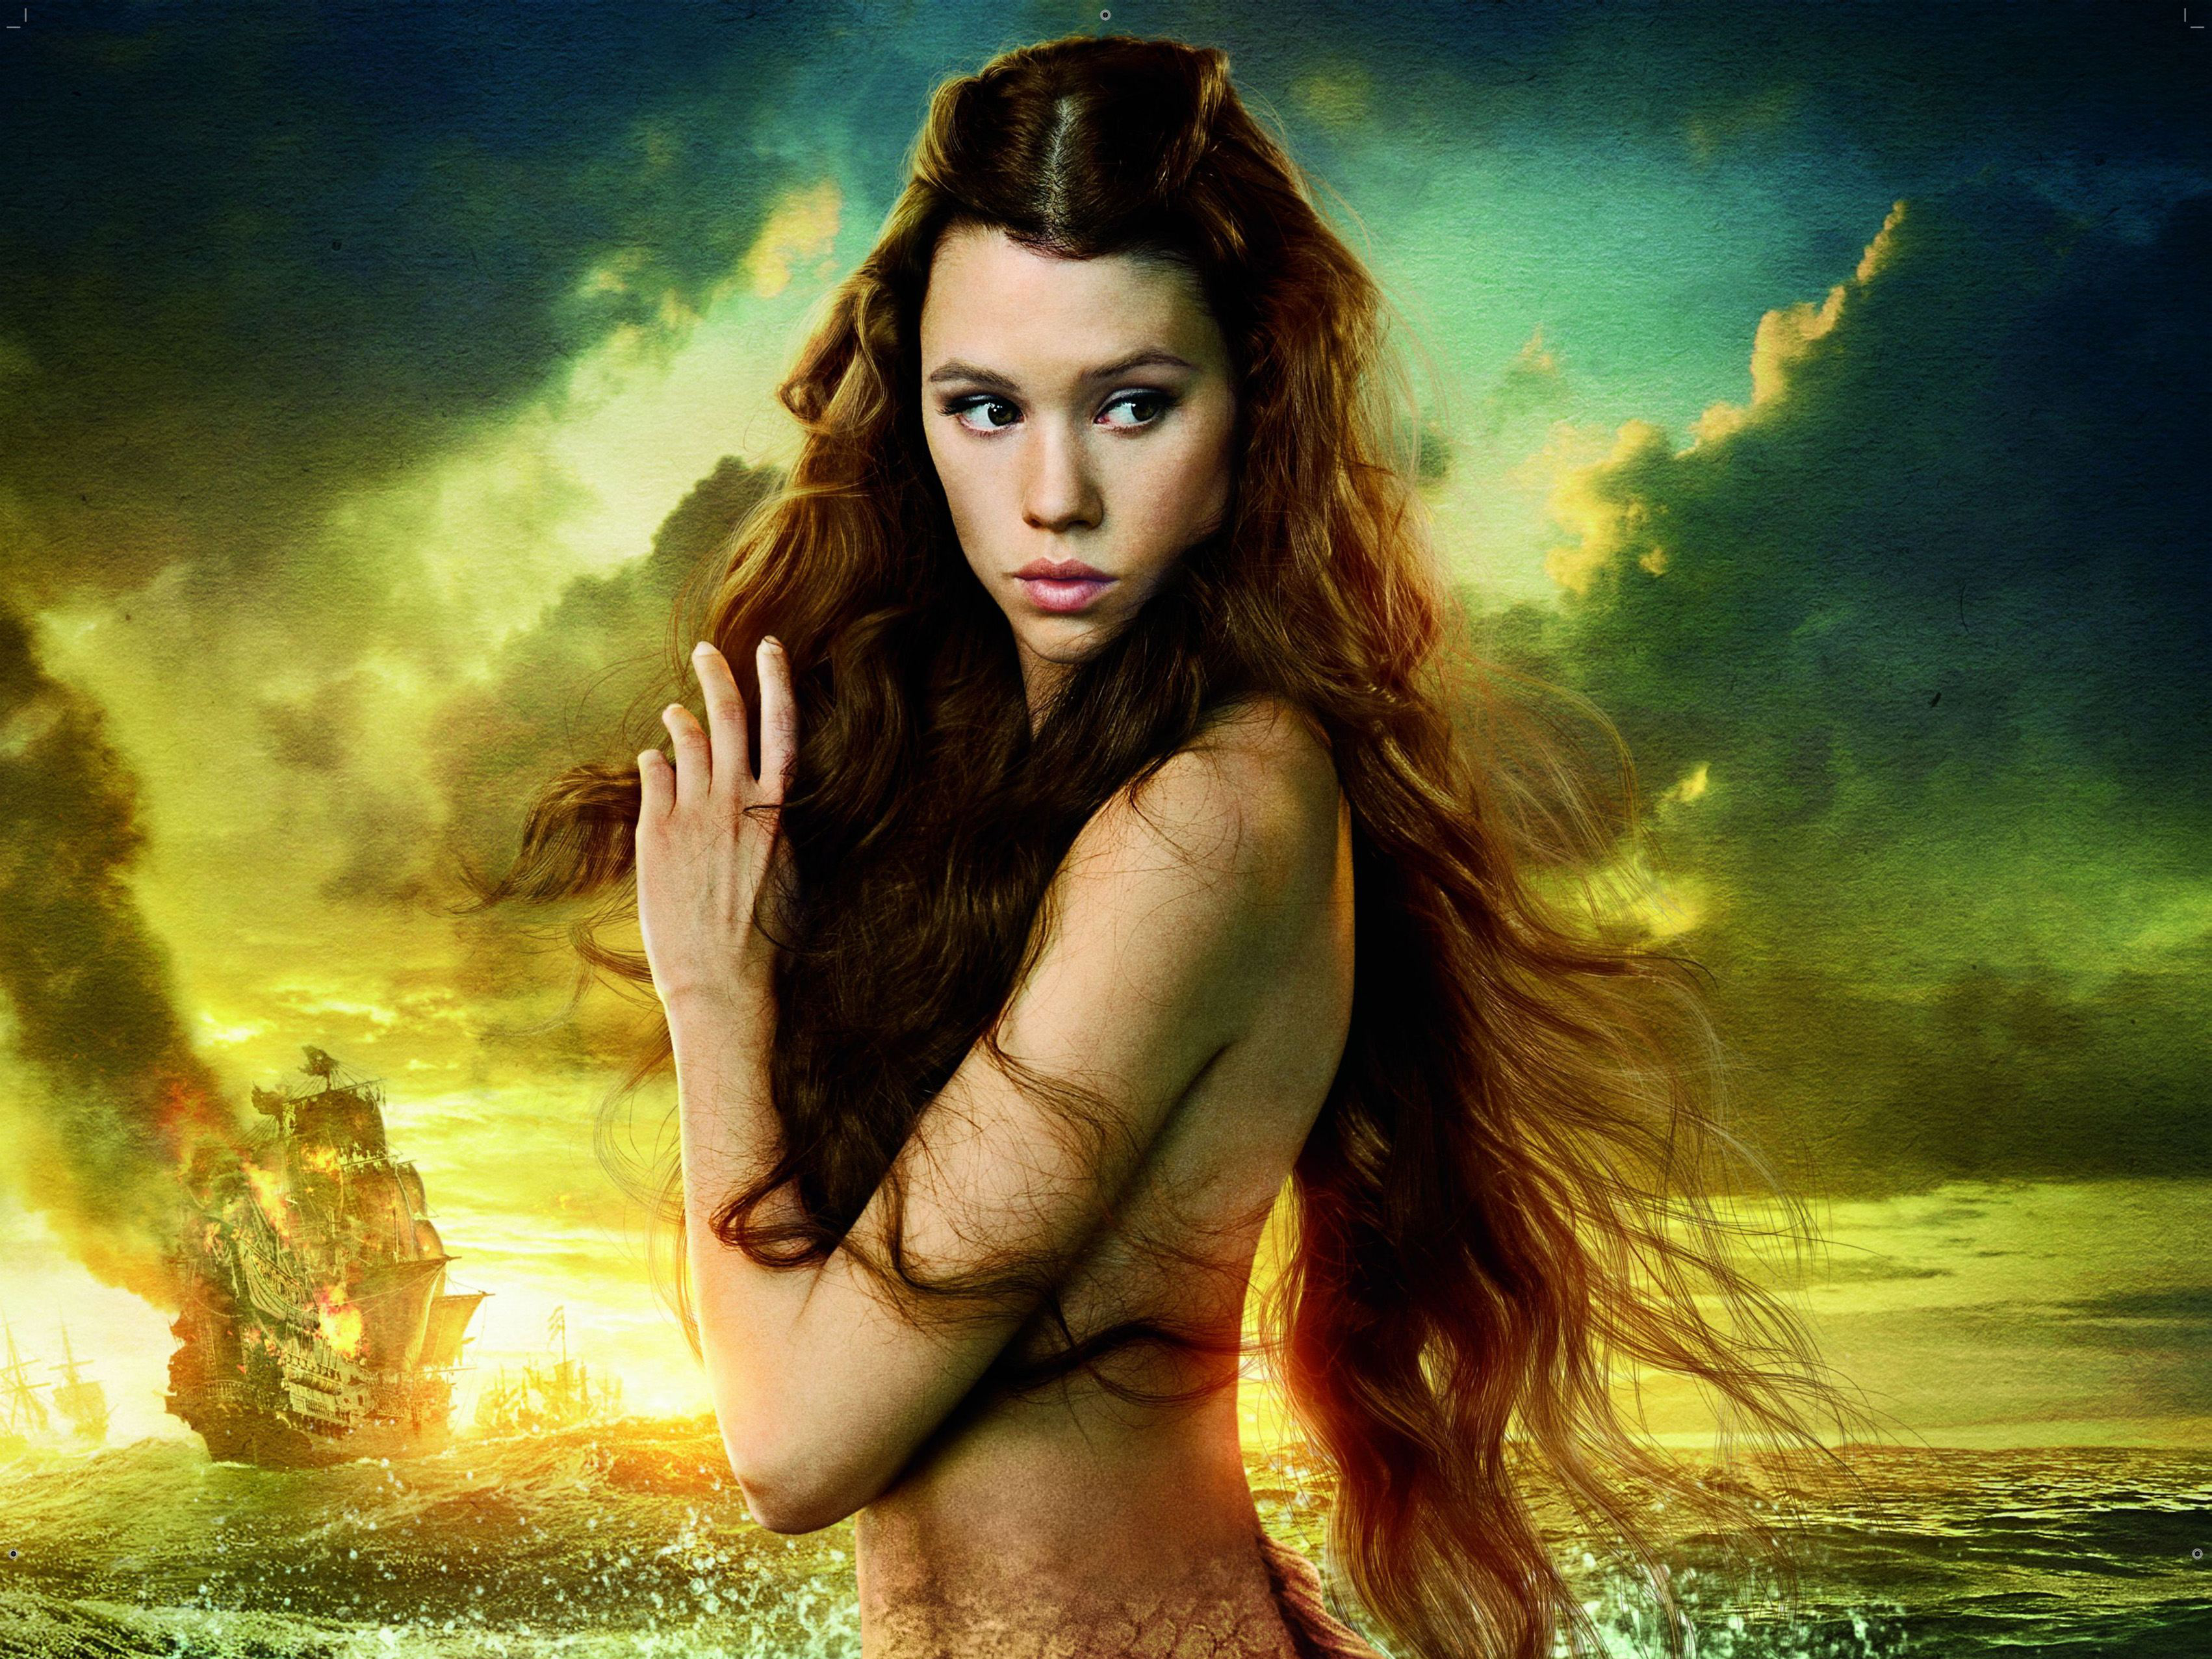 Astrid Berges Frisbey Syrena Pirates Of The Caribbean 3404x2553